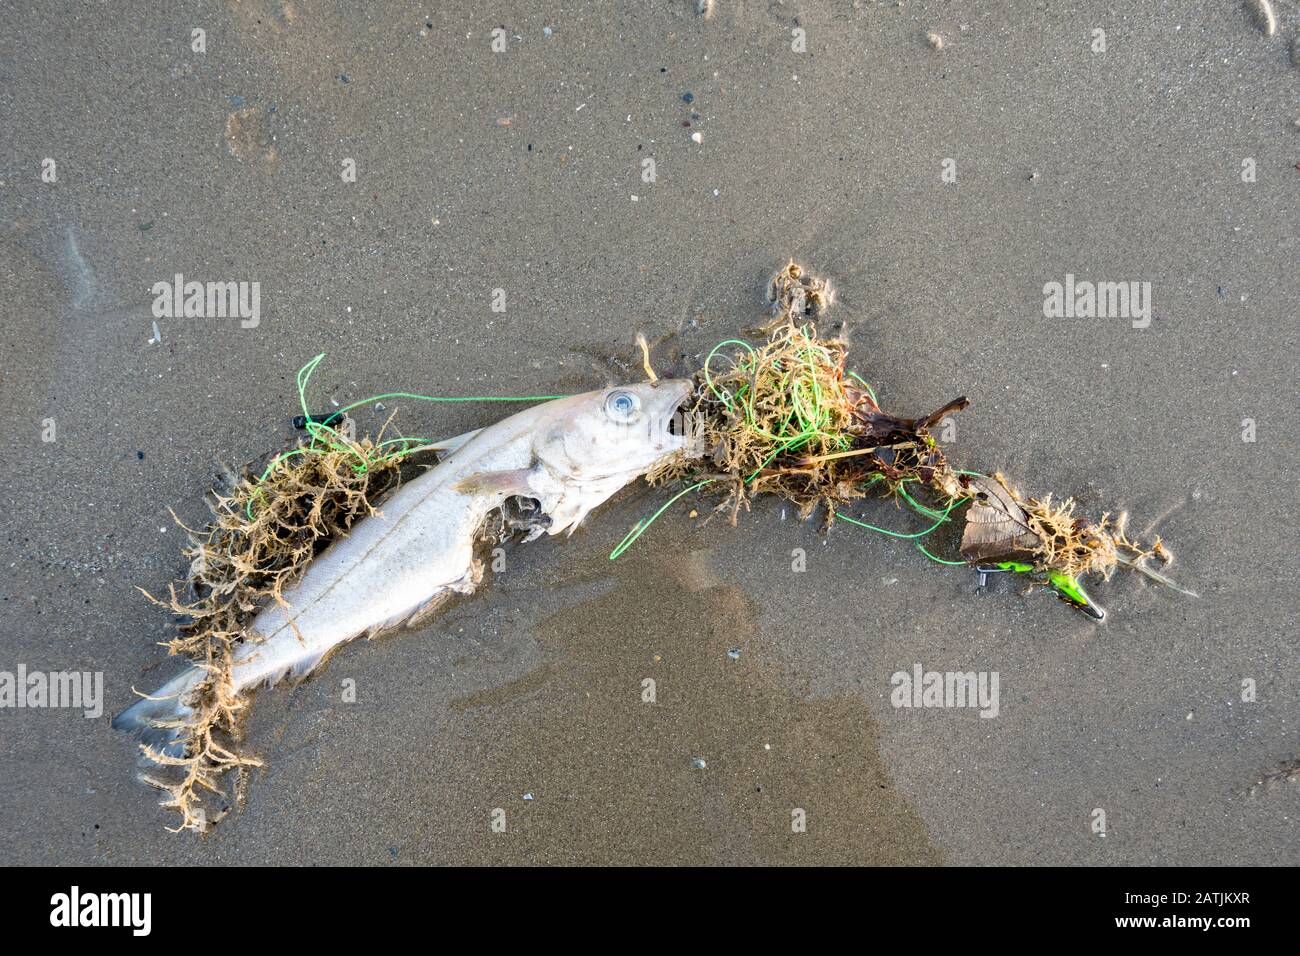 Dead sea fish caught up in discarded fishing line Stock Photo